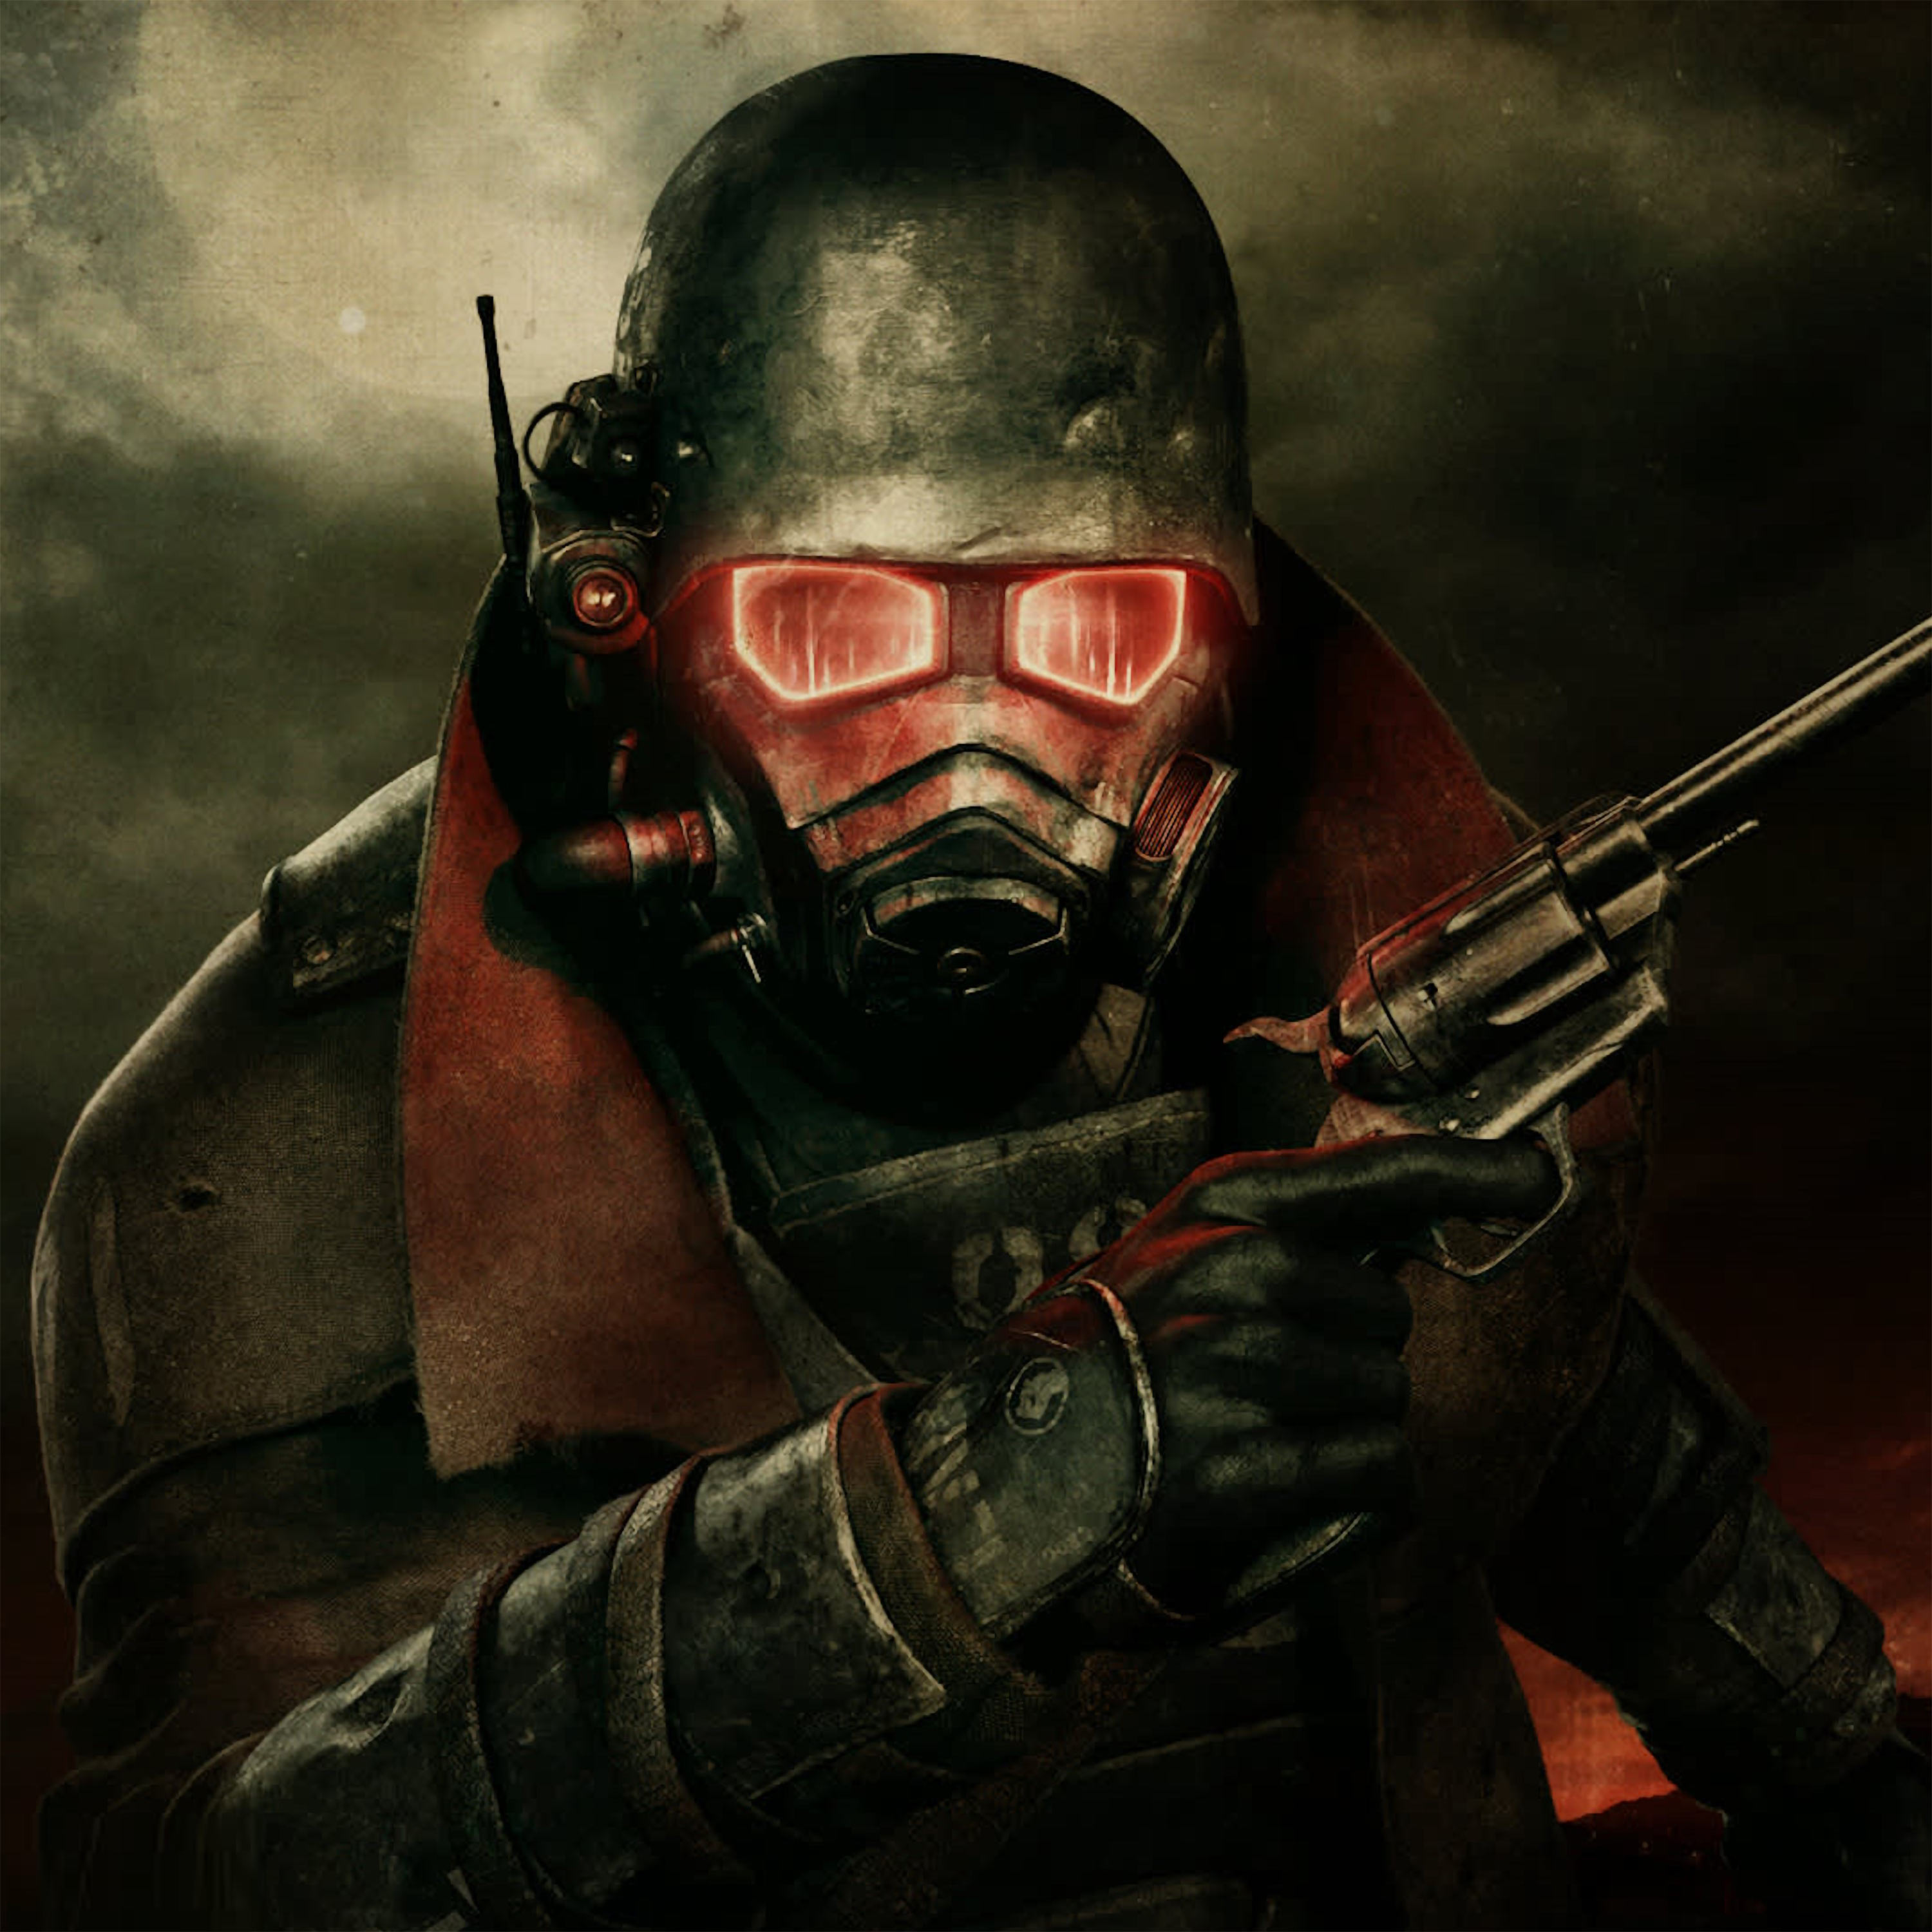 Fate Condensed: Fallout New Vegas – Radioactive Dreams